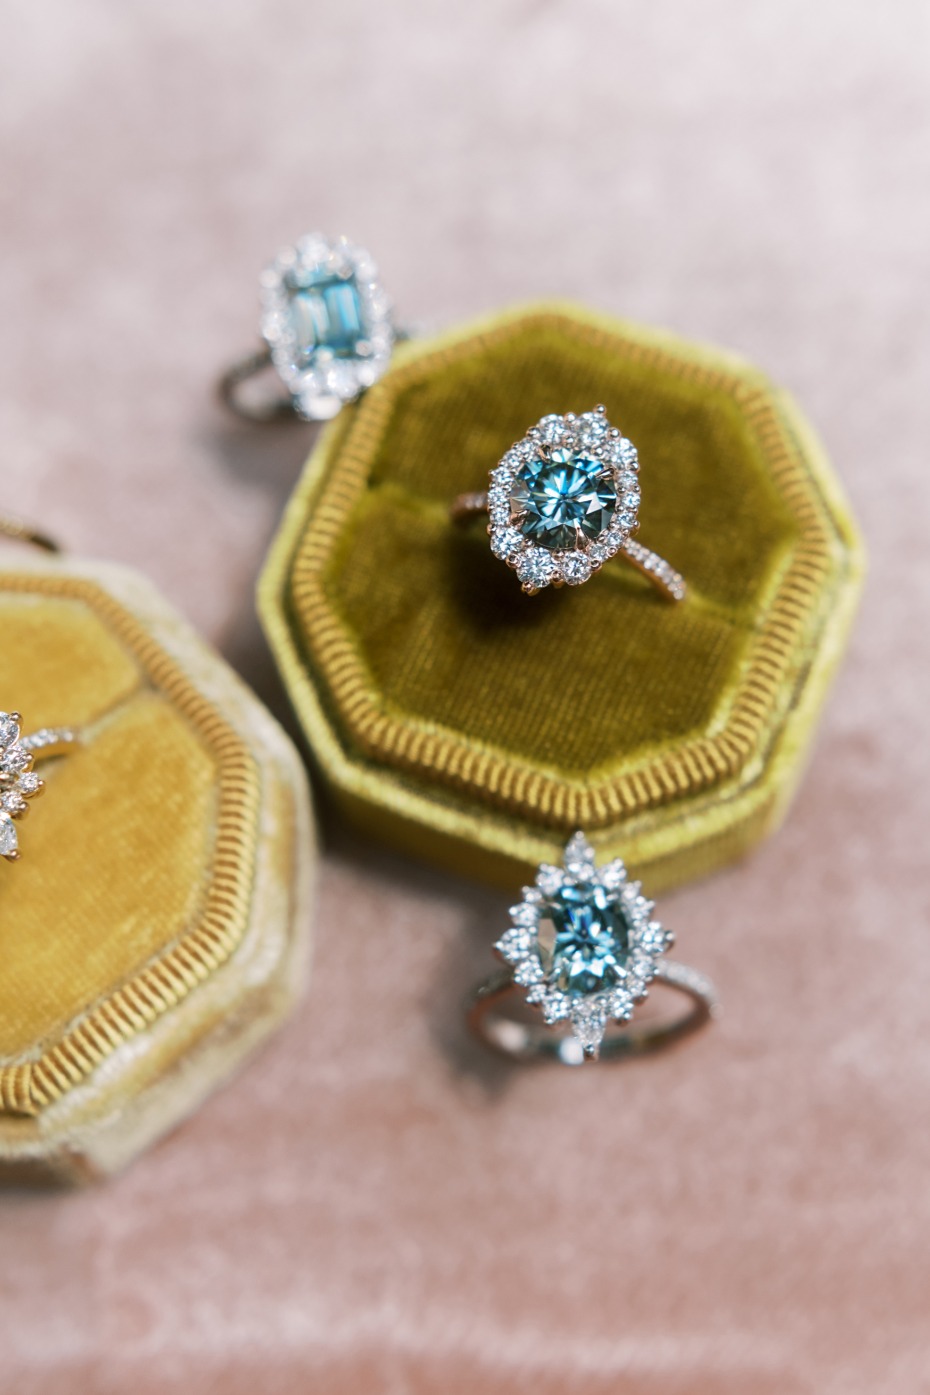 Ethically Made And Straight Up Stunning, We Canât Help But Say Yes To These Engagement Rings By Kristin Coffin